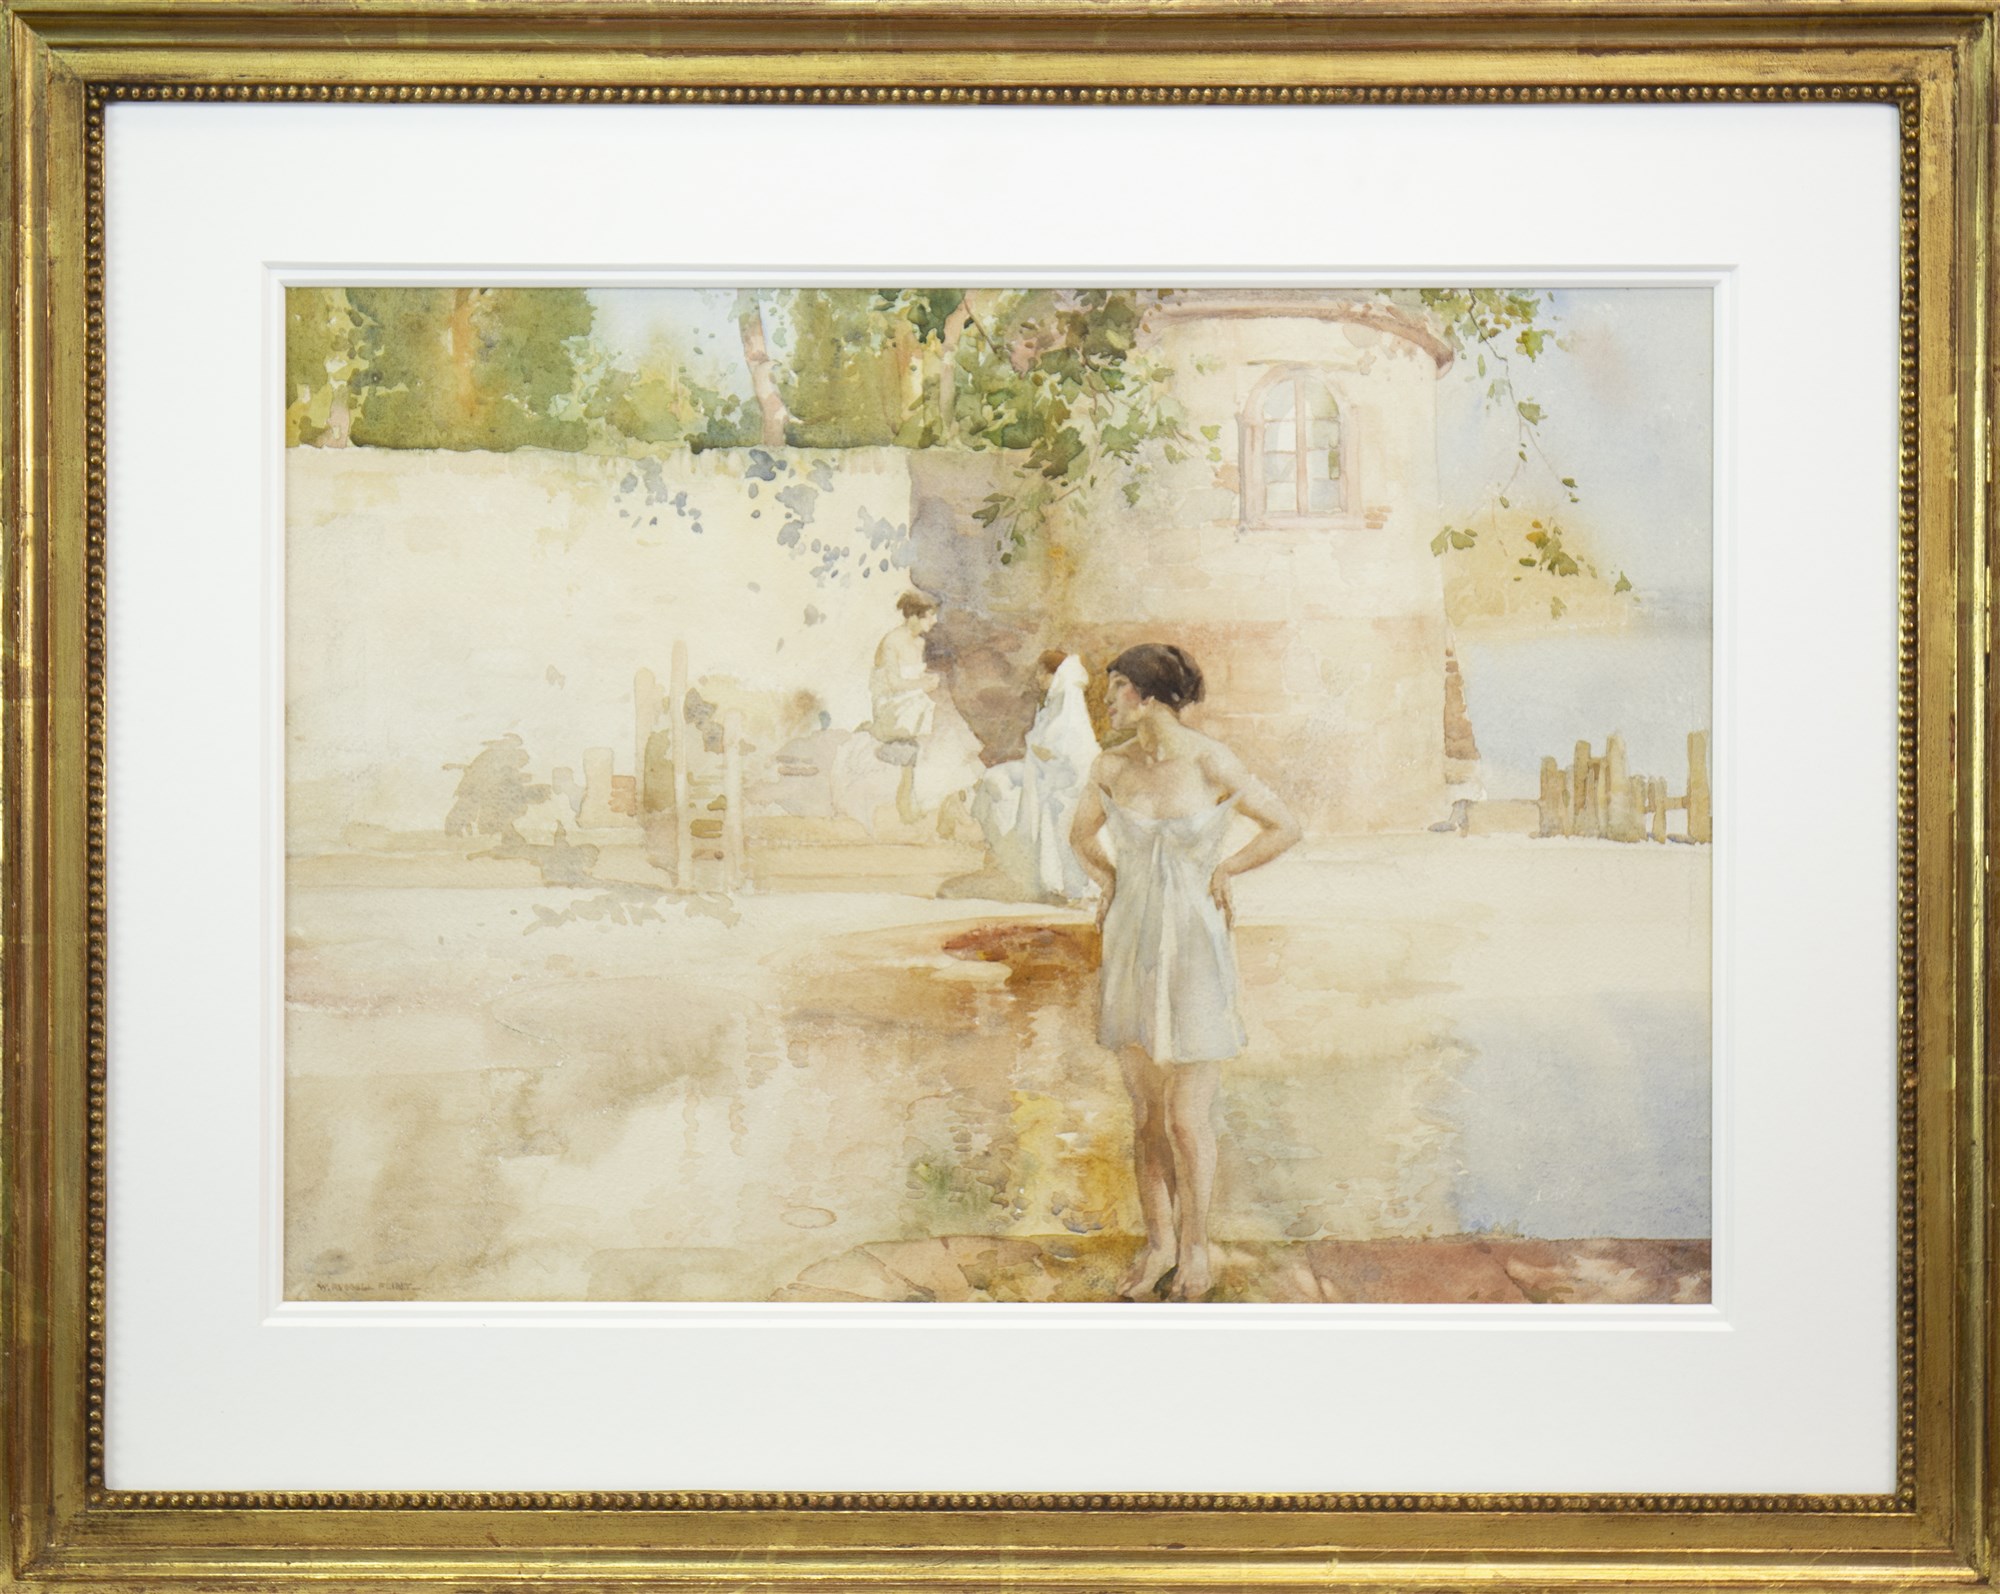 AN ORIGINAL WATERCOLOUR, THE BATHERS, ST TROPEZ BY SIR WILLIAM RUSSELL FLINT